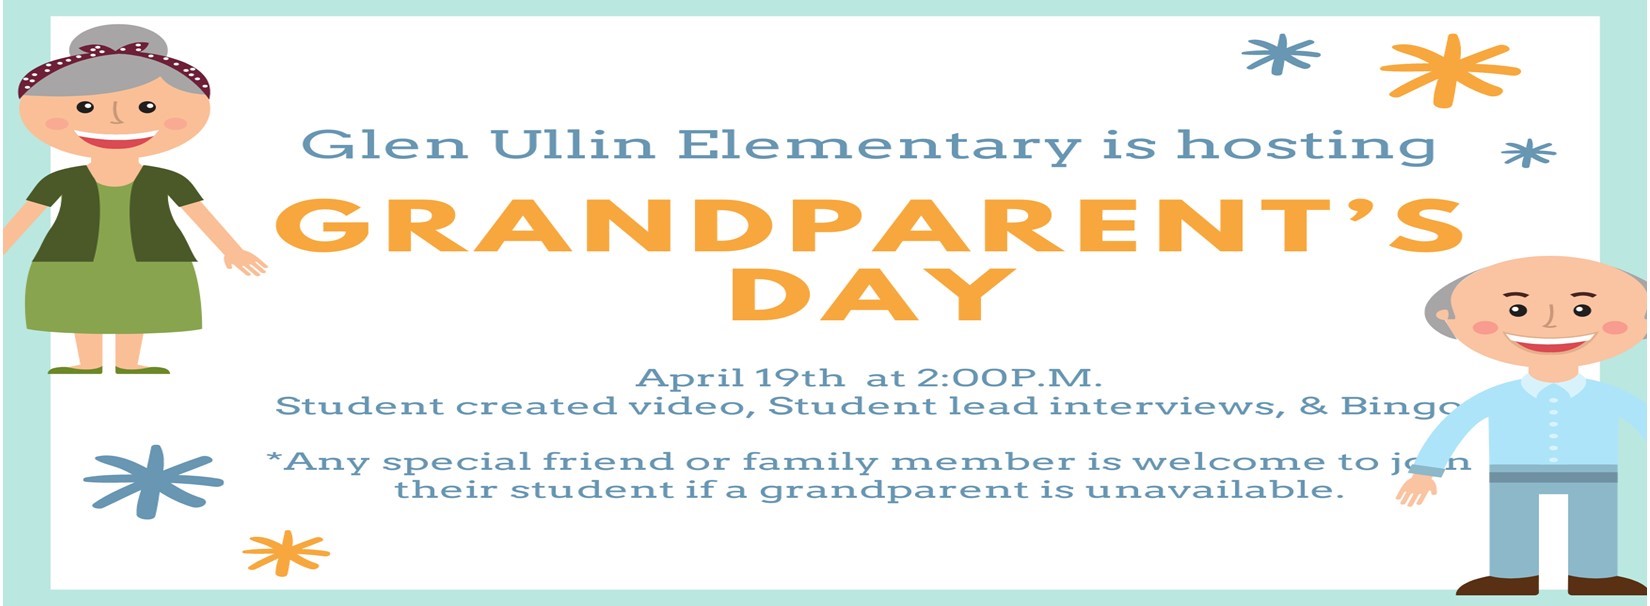 information for grandparents day